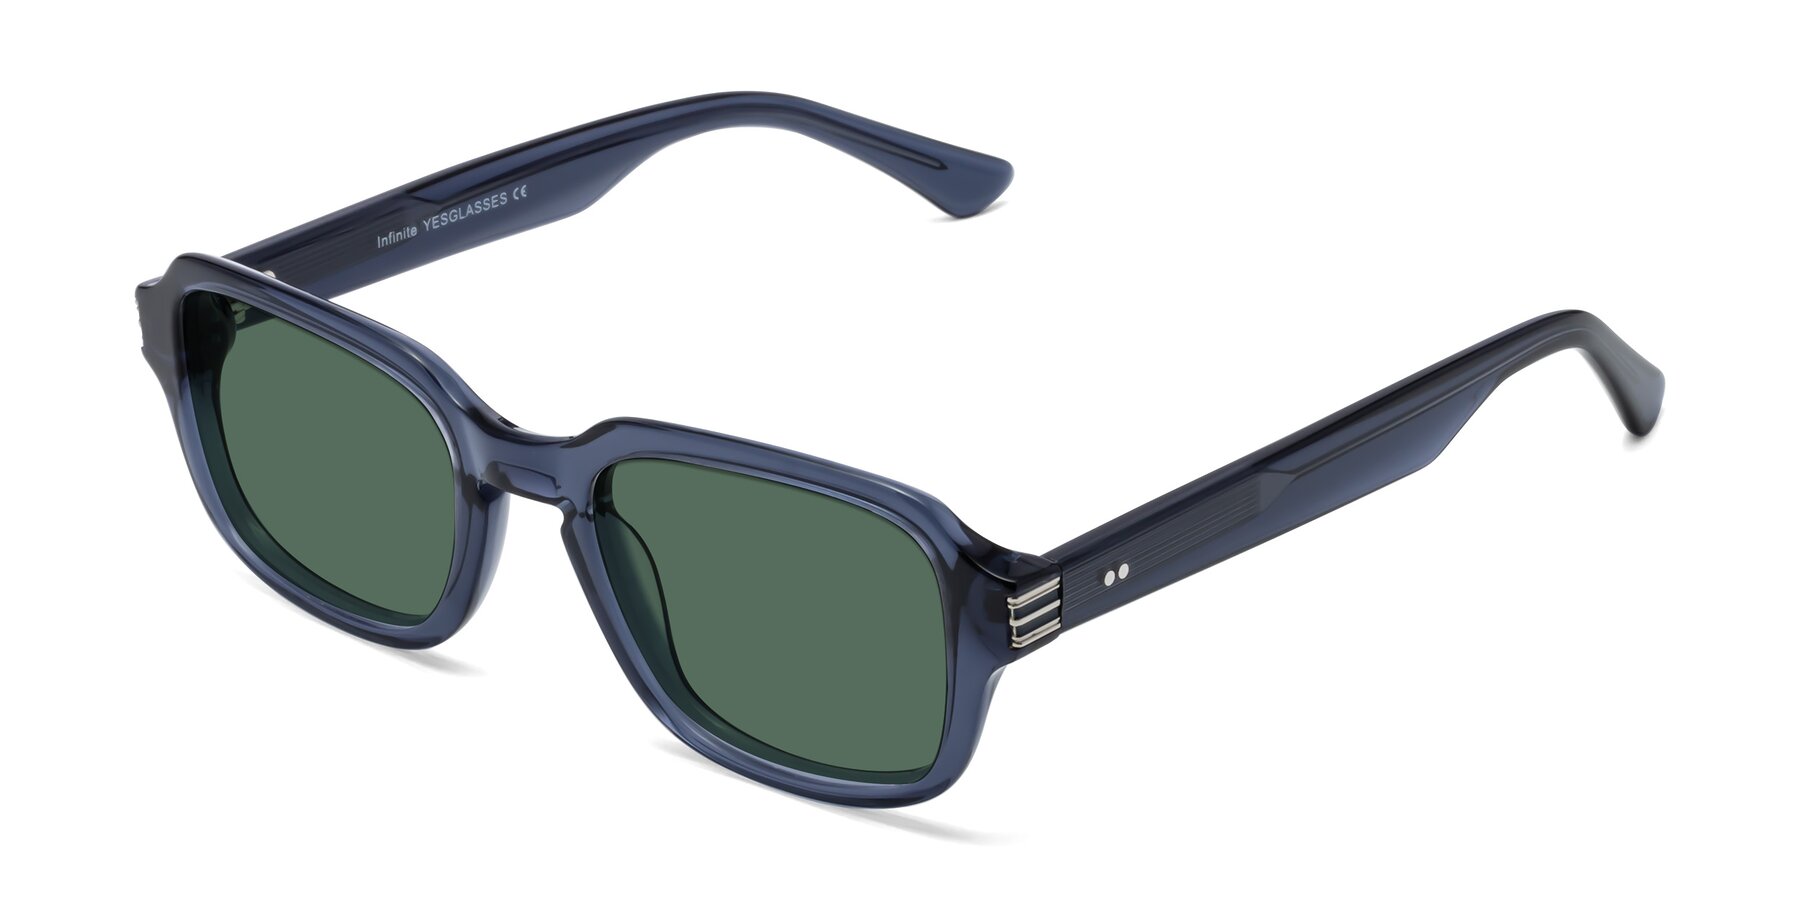 Angle of Infinite in Dark Blue with Green Polarized Lenses